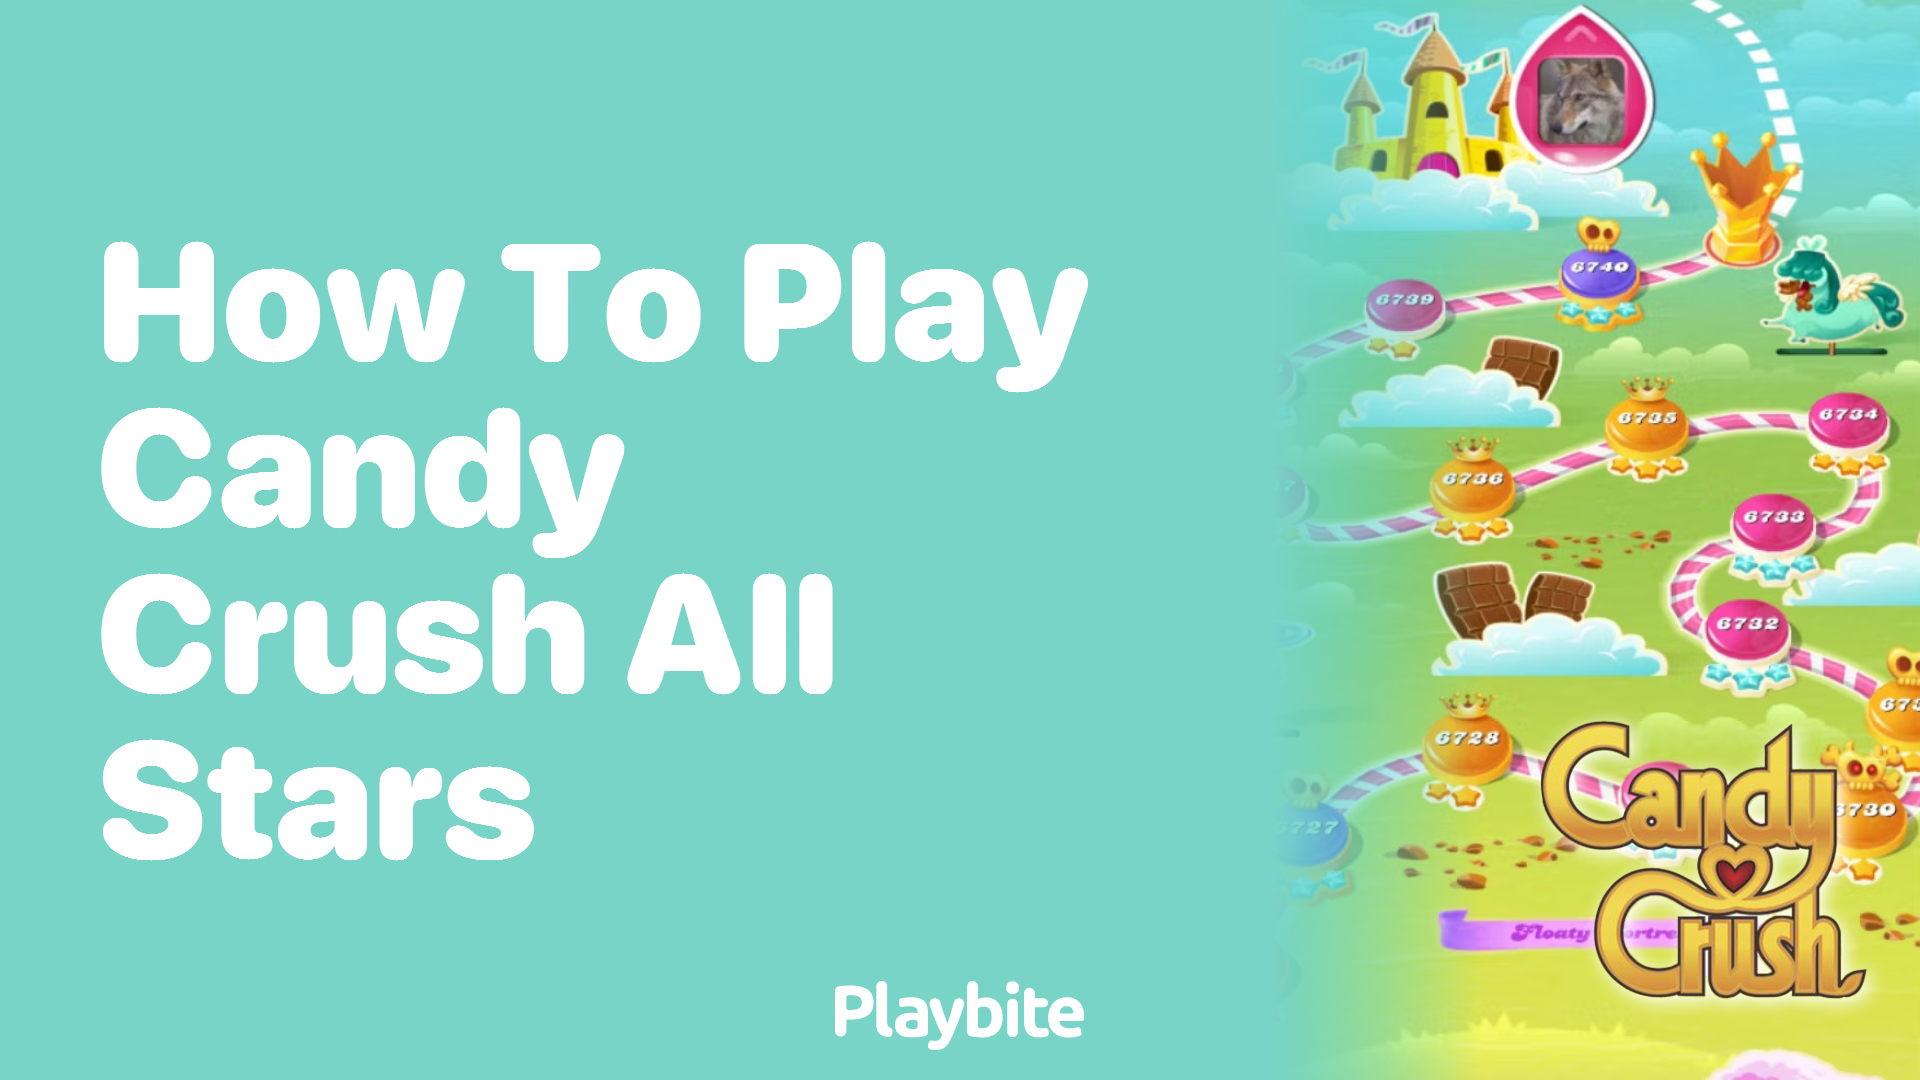 How to Play Candy Crush All Stars: Tips and Tricks